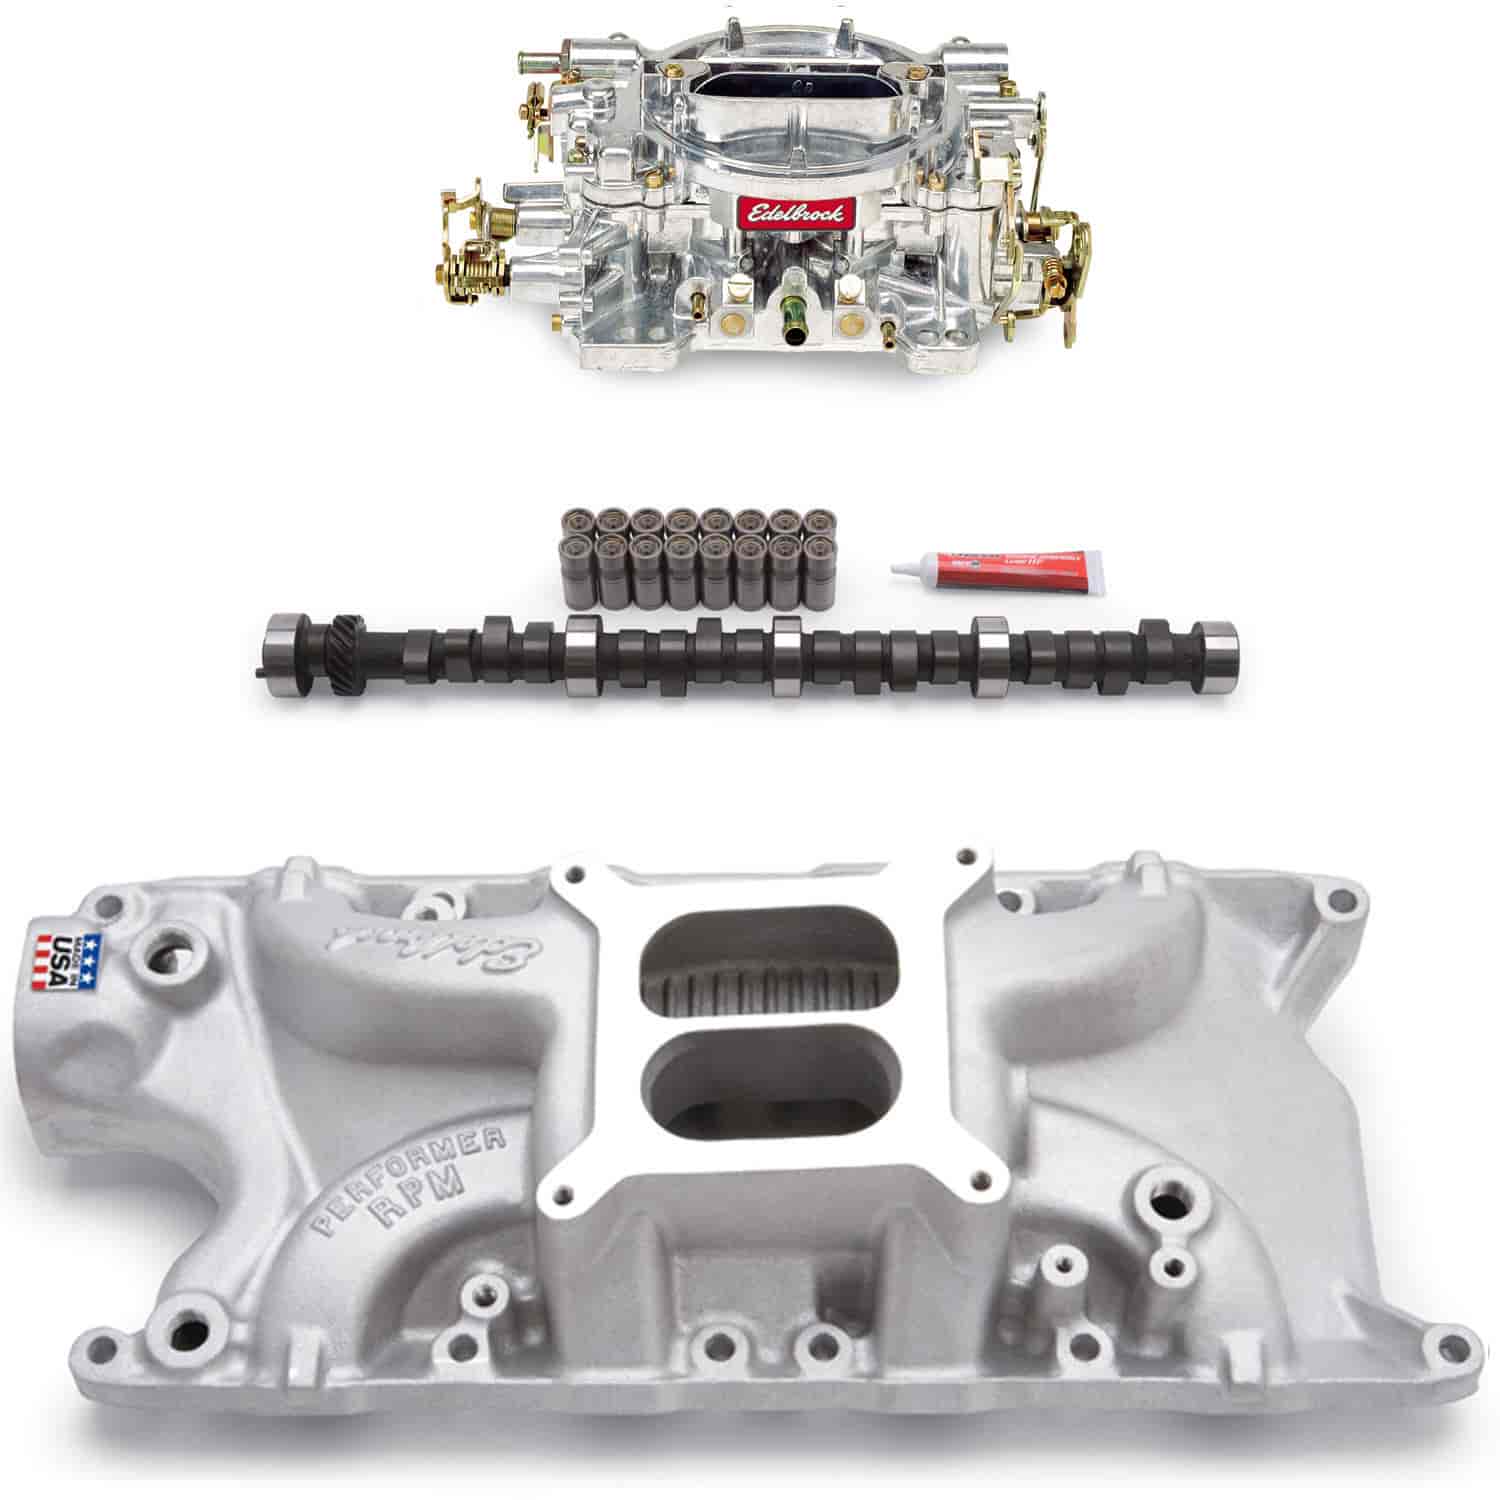 Performer RPM Power Package Intake Manifold, Carburetor and